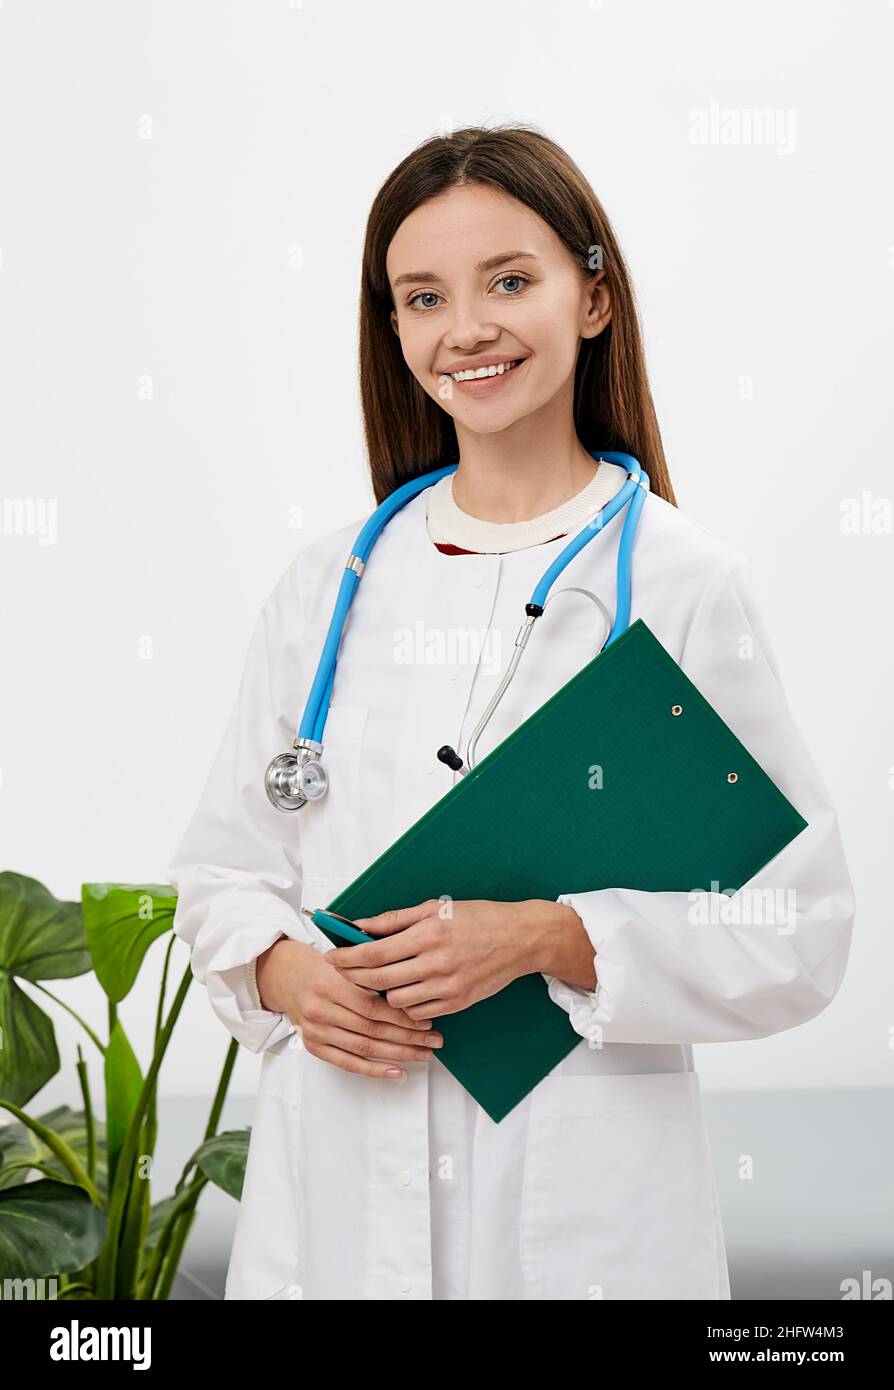 doctor occupation. Brunette female general practitioner with patient's medical record in her hands standing in a medical clinic, portrait Stock Photo